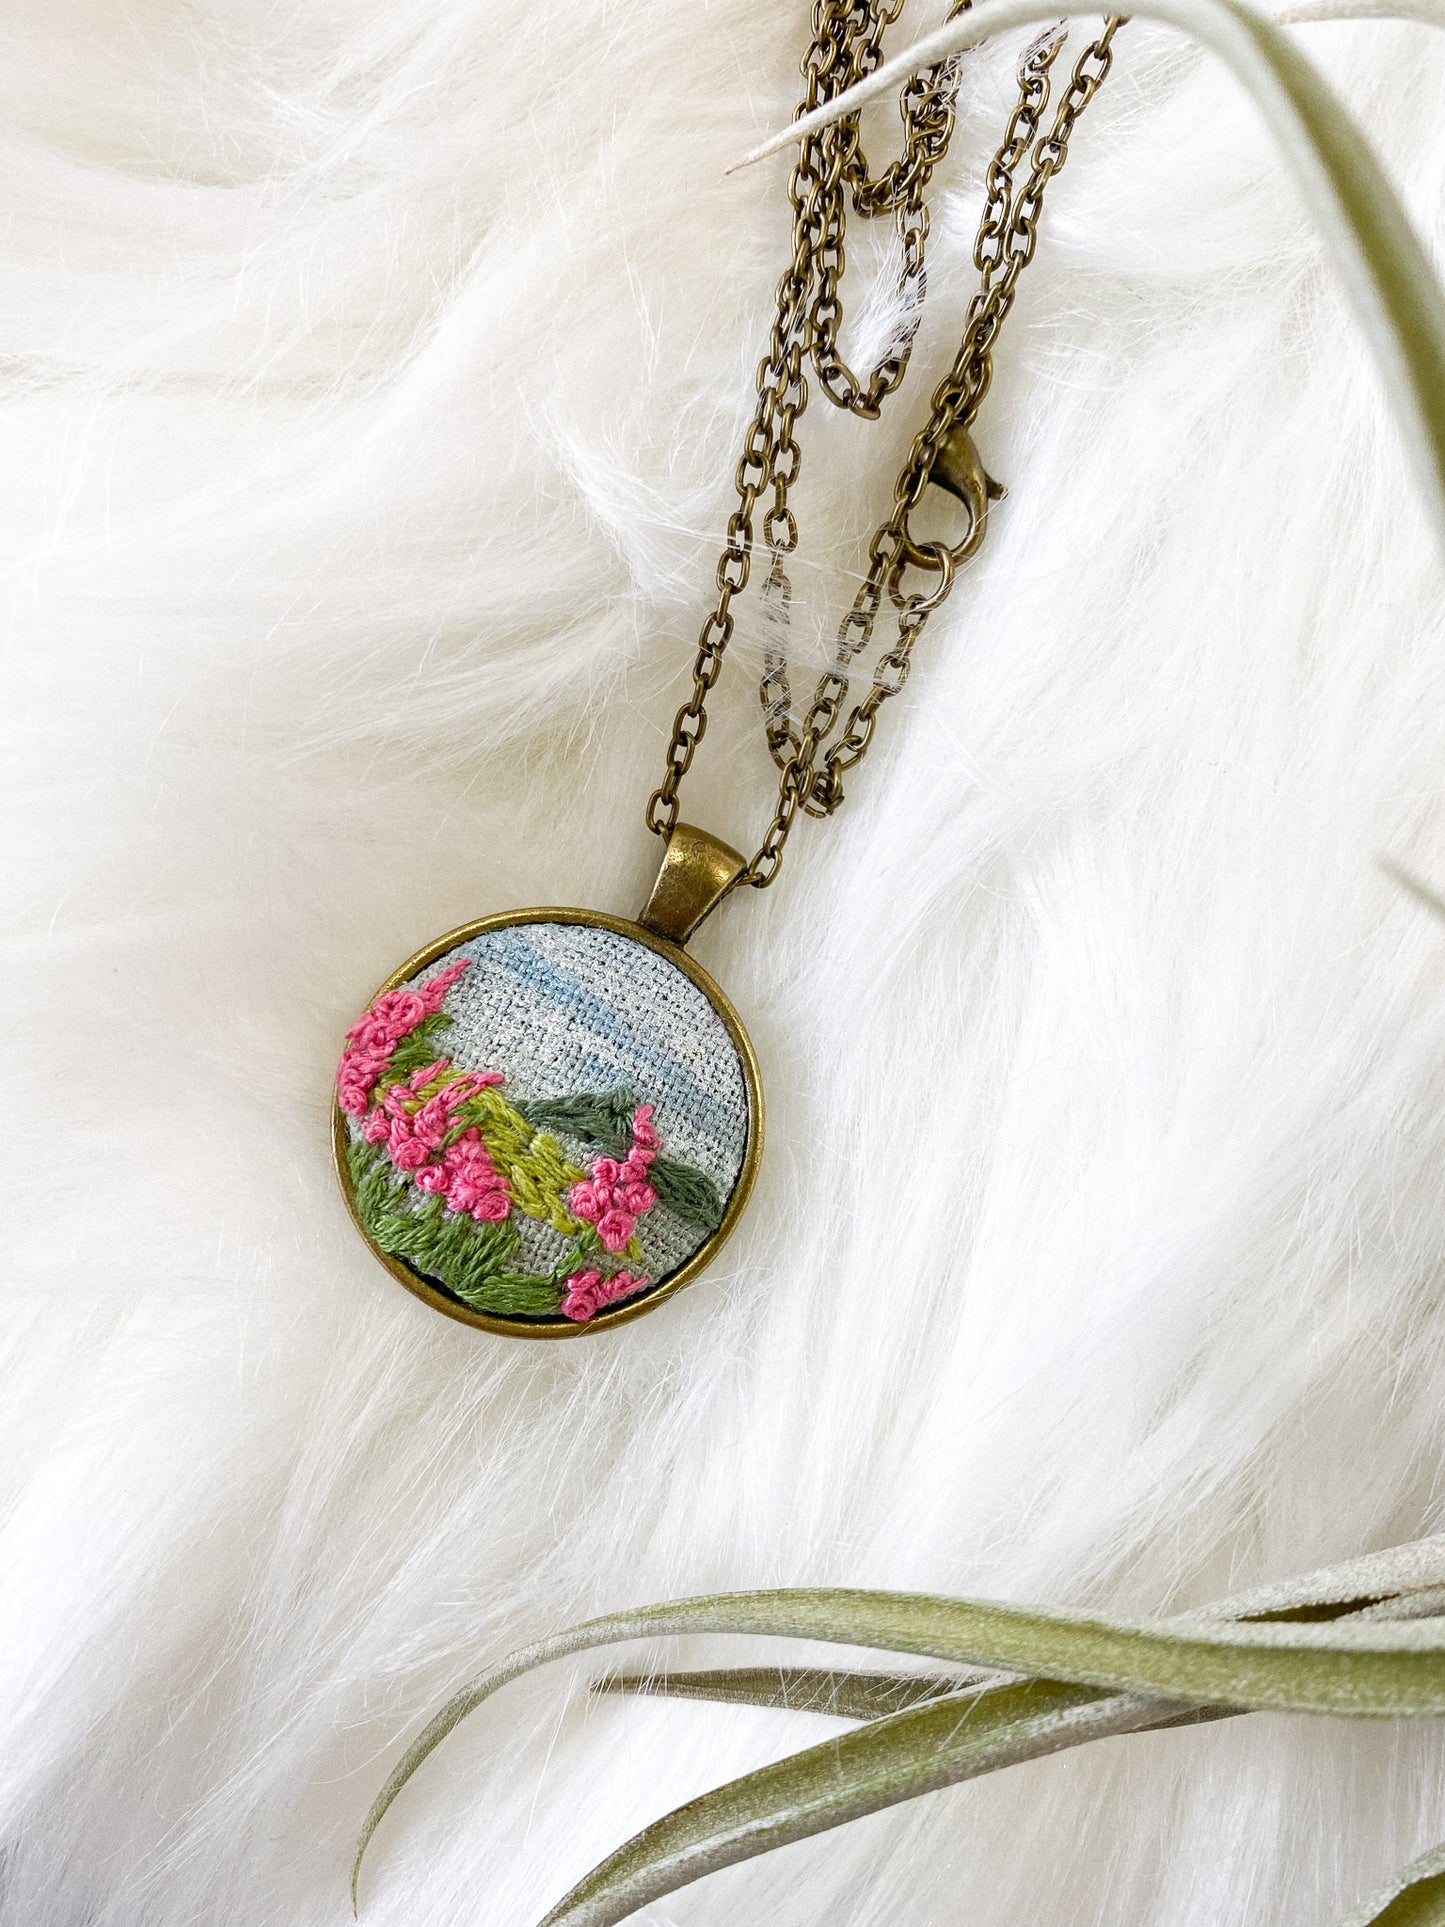 Blue Skies + Fireweed Necklace by Brittany Montour